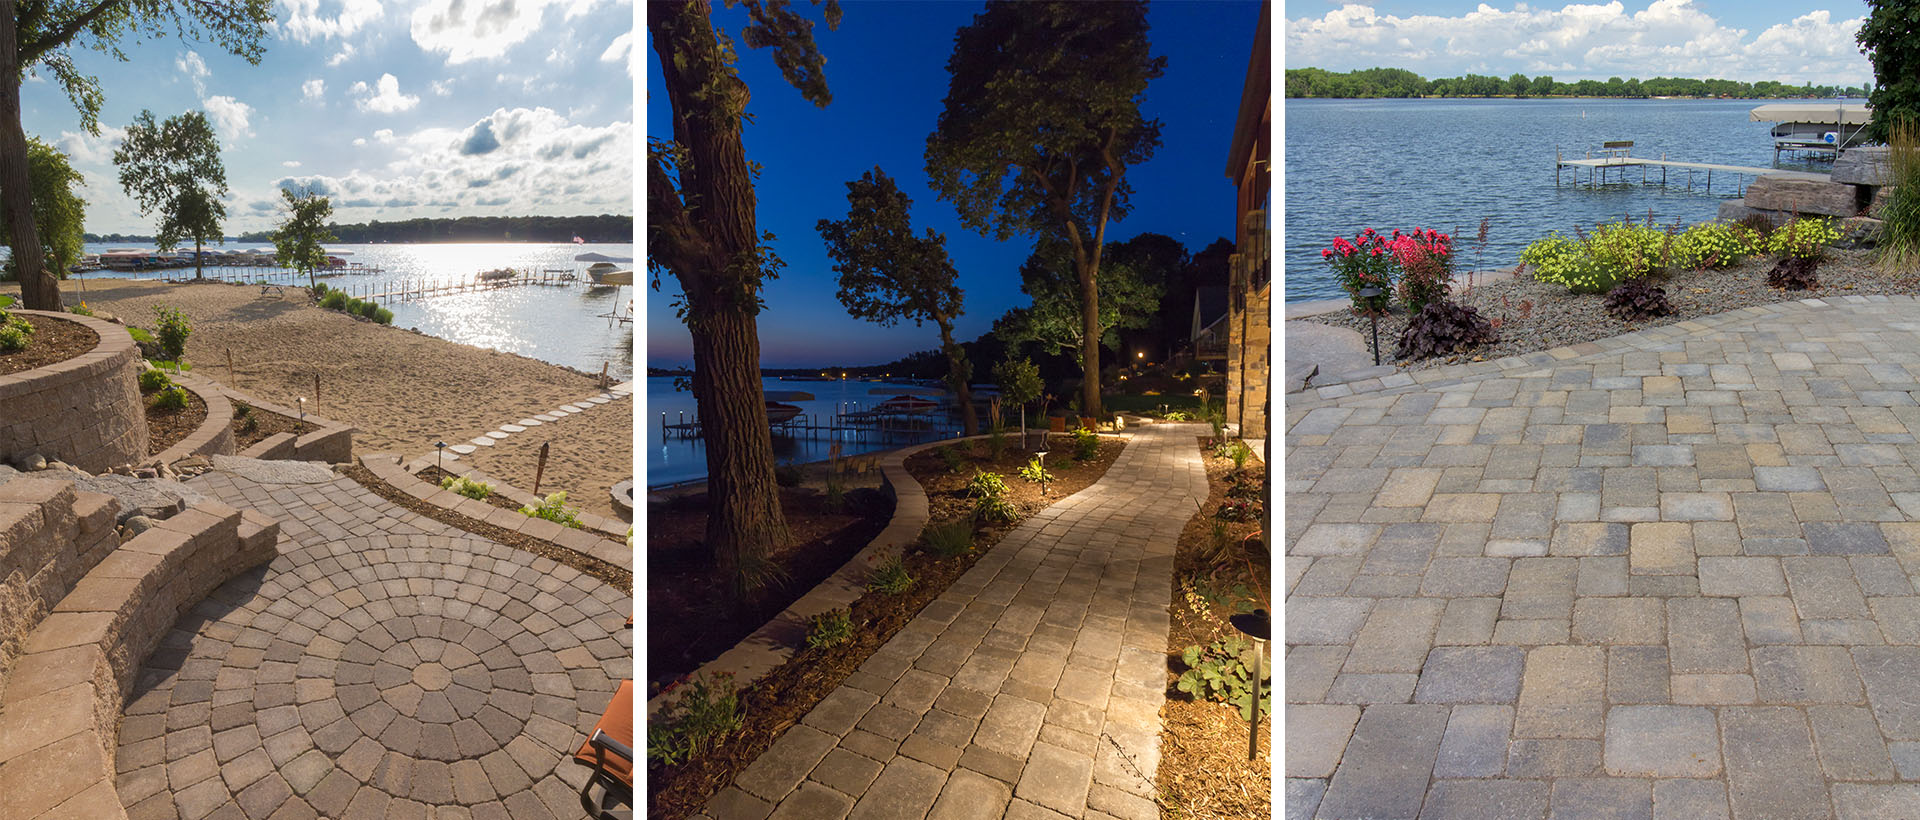 When your architecture calls for the look of a centuries-worn paver patio, pathway or drive, Lamont is a popular choice of property owners and designers because of its aged appearance and endless design opportunities.